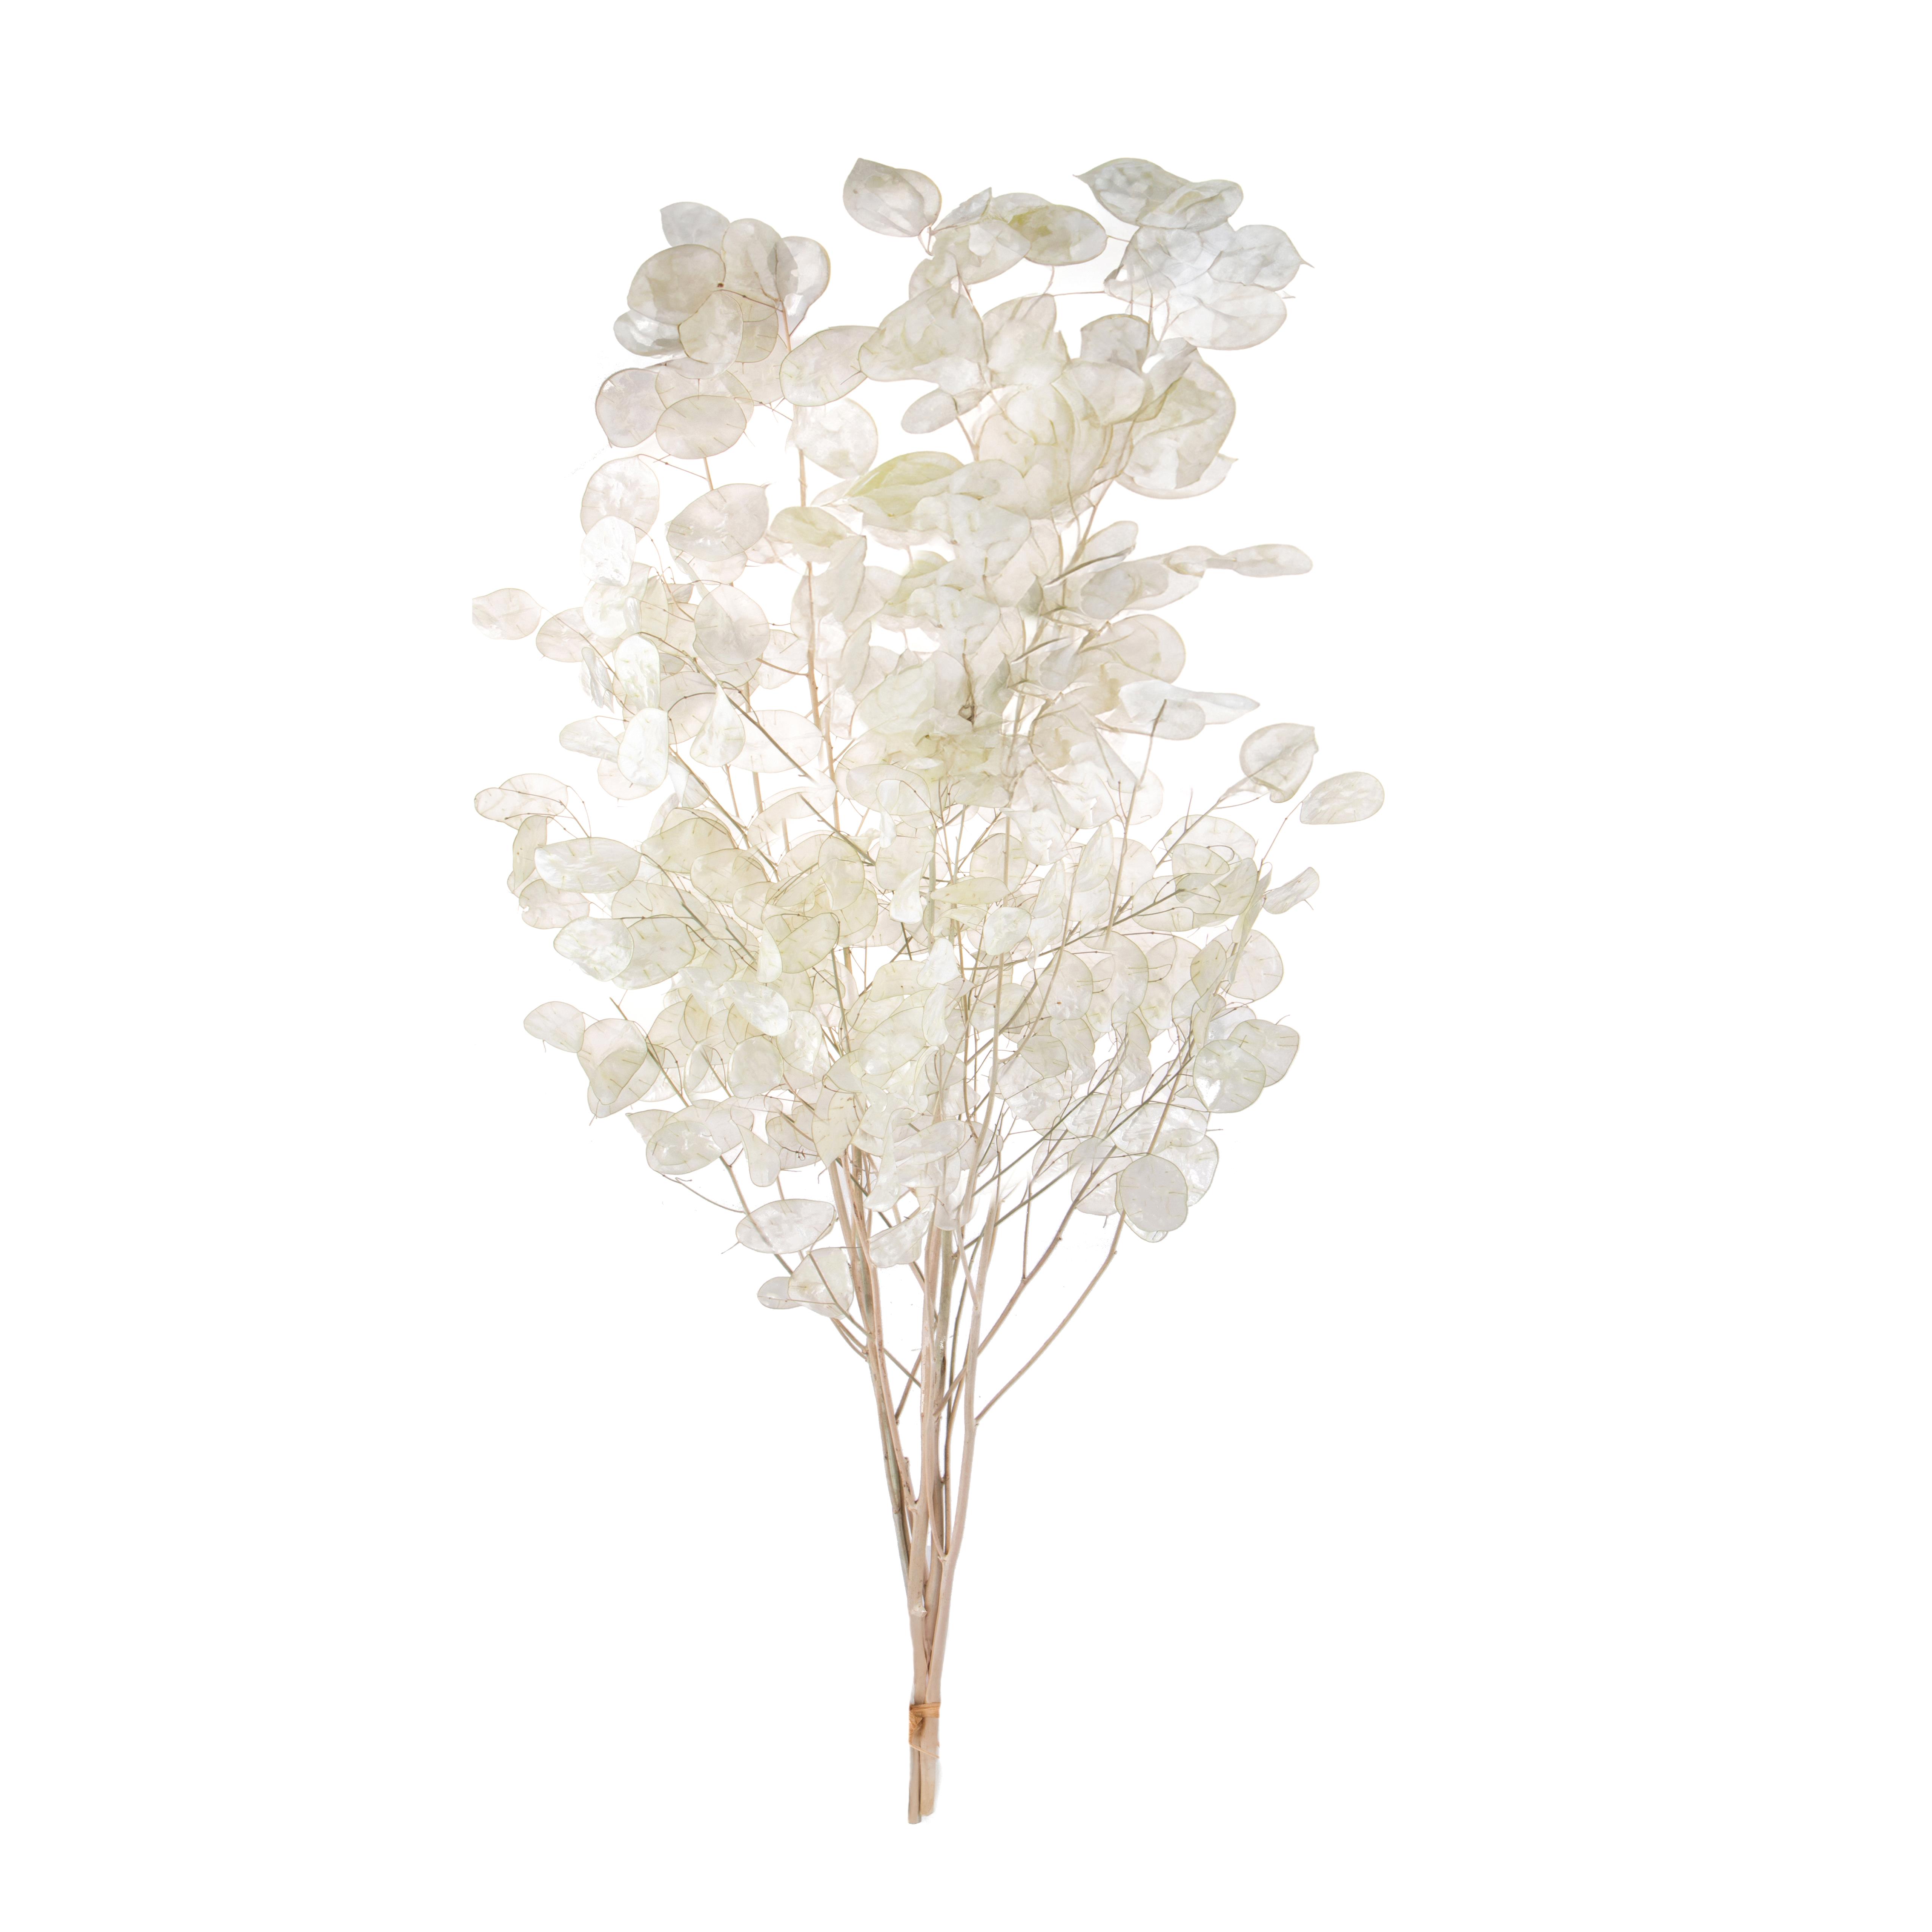 NATURAL PRODUCTS DRIED FLOWERS AND ERBS, FLOWERS, FRUITS AND NATURAL PROTEES, LUNARIA REDIVIVA MAZZO 90 CM PRIMA SCELT